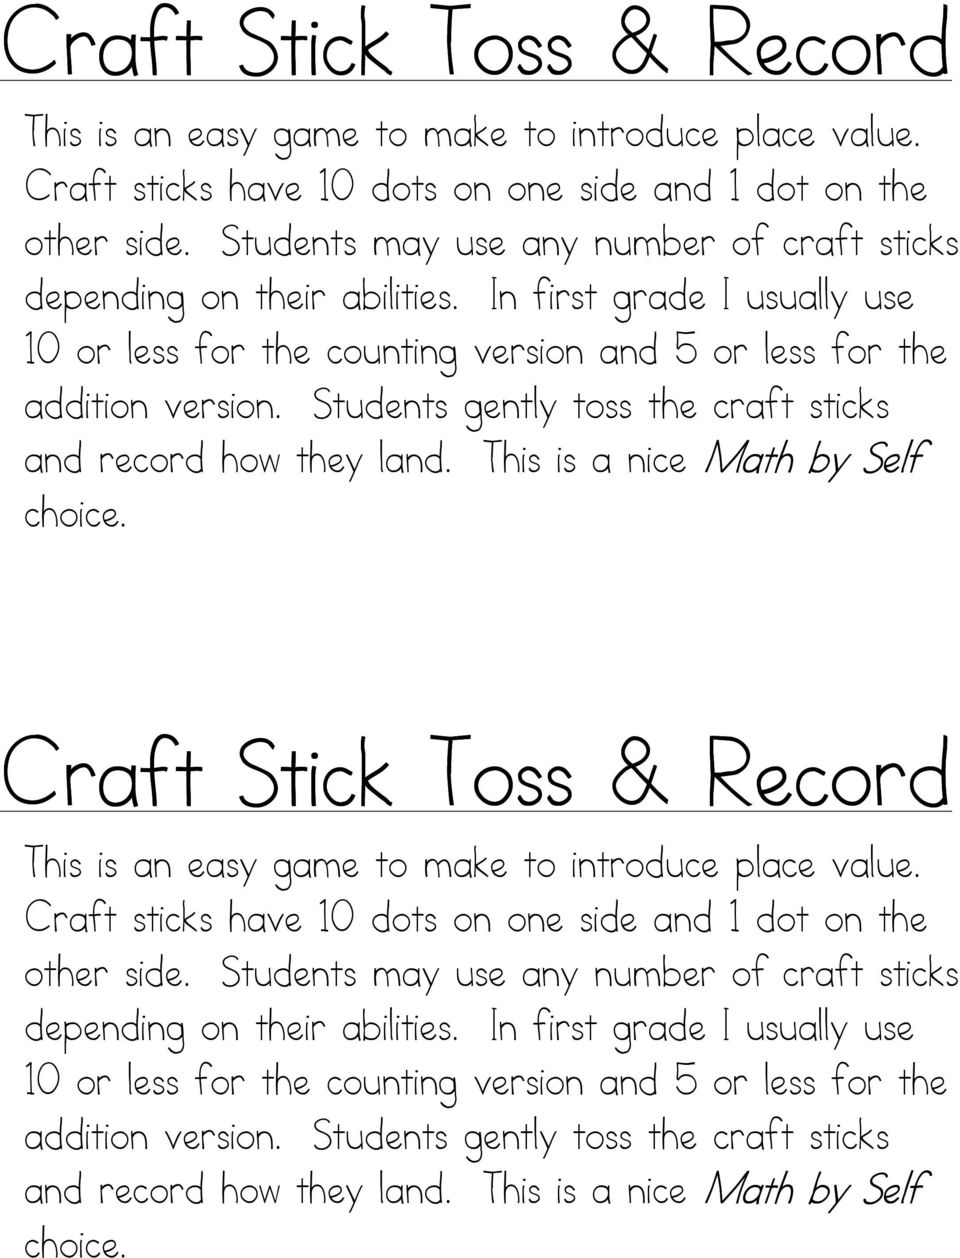 Students gently toss the craft sticks and record how they land. This is a nice Math by Self choice.   Students gently toss the craft sticks and record how they land.